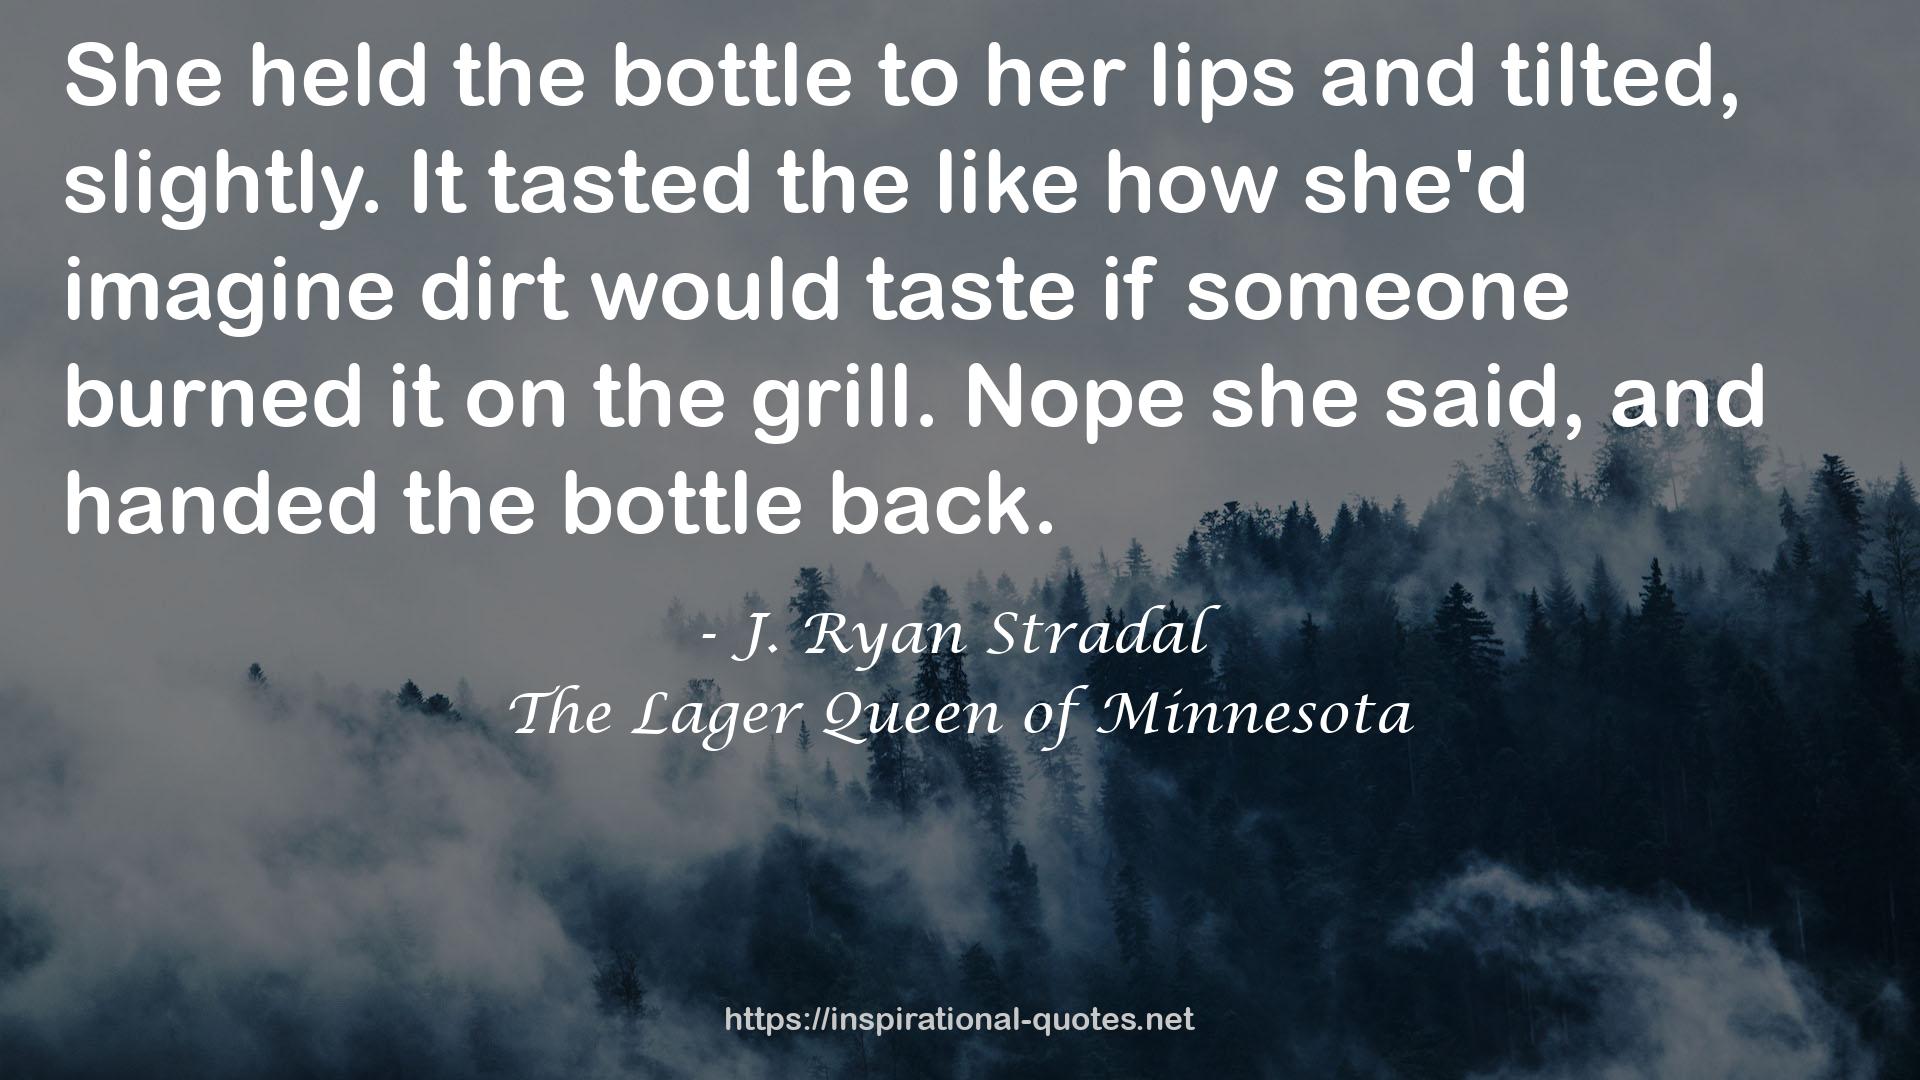 The Lager Queen of Minnesota QUOTES